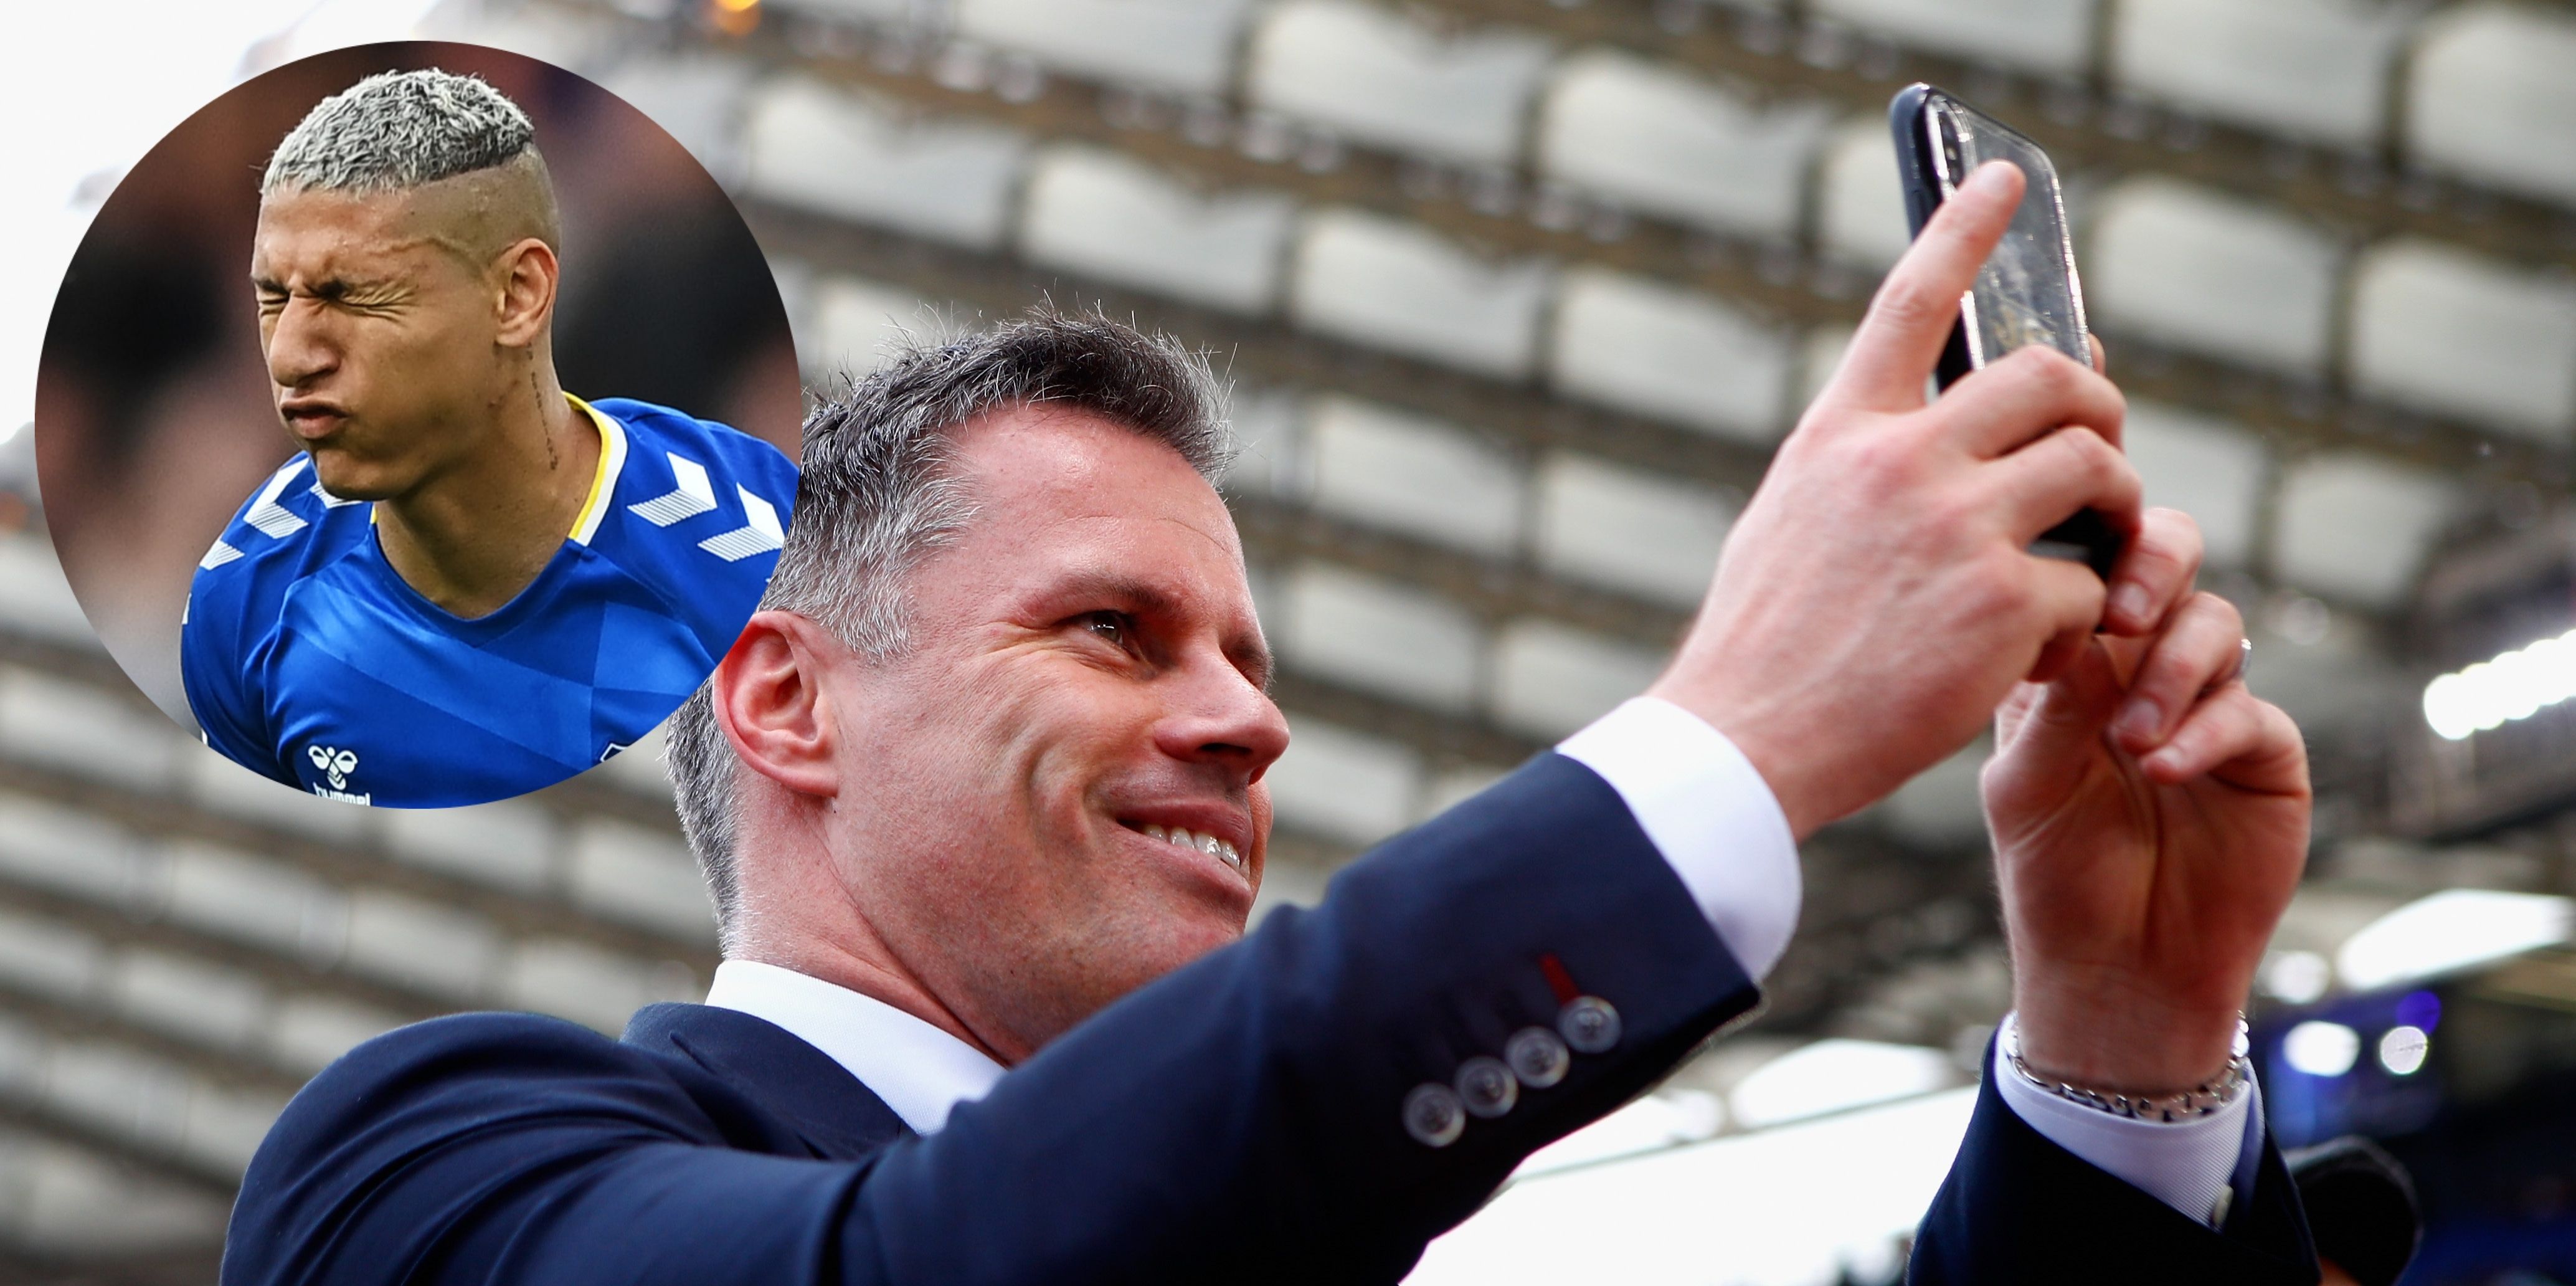 ‘Actually quite like this’ – Carragher responds to Richarlison’s aggressive ‘wash your mouth’ tweet